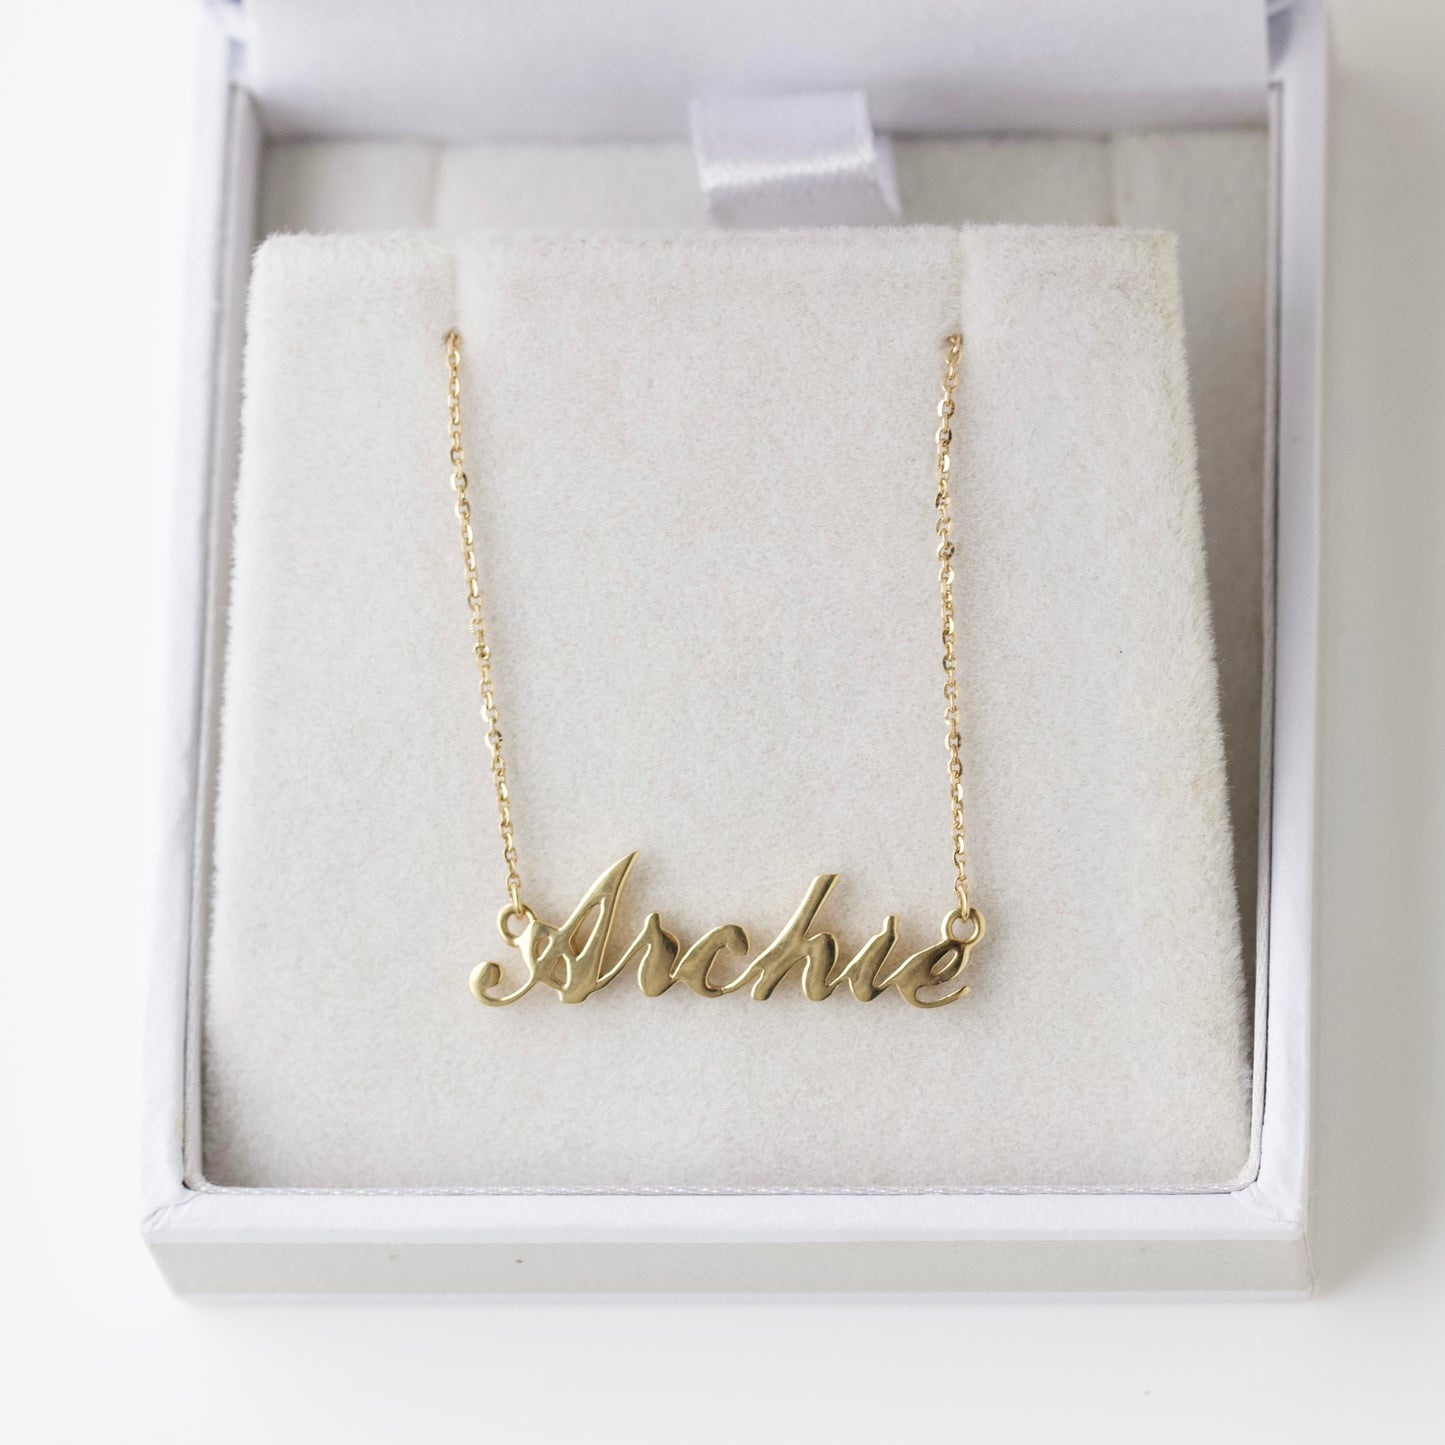 SAMPLE SALE - Archie Name Necklace in 9k Solid Yellow Gold